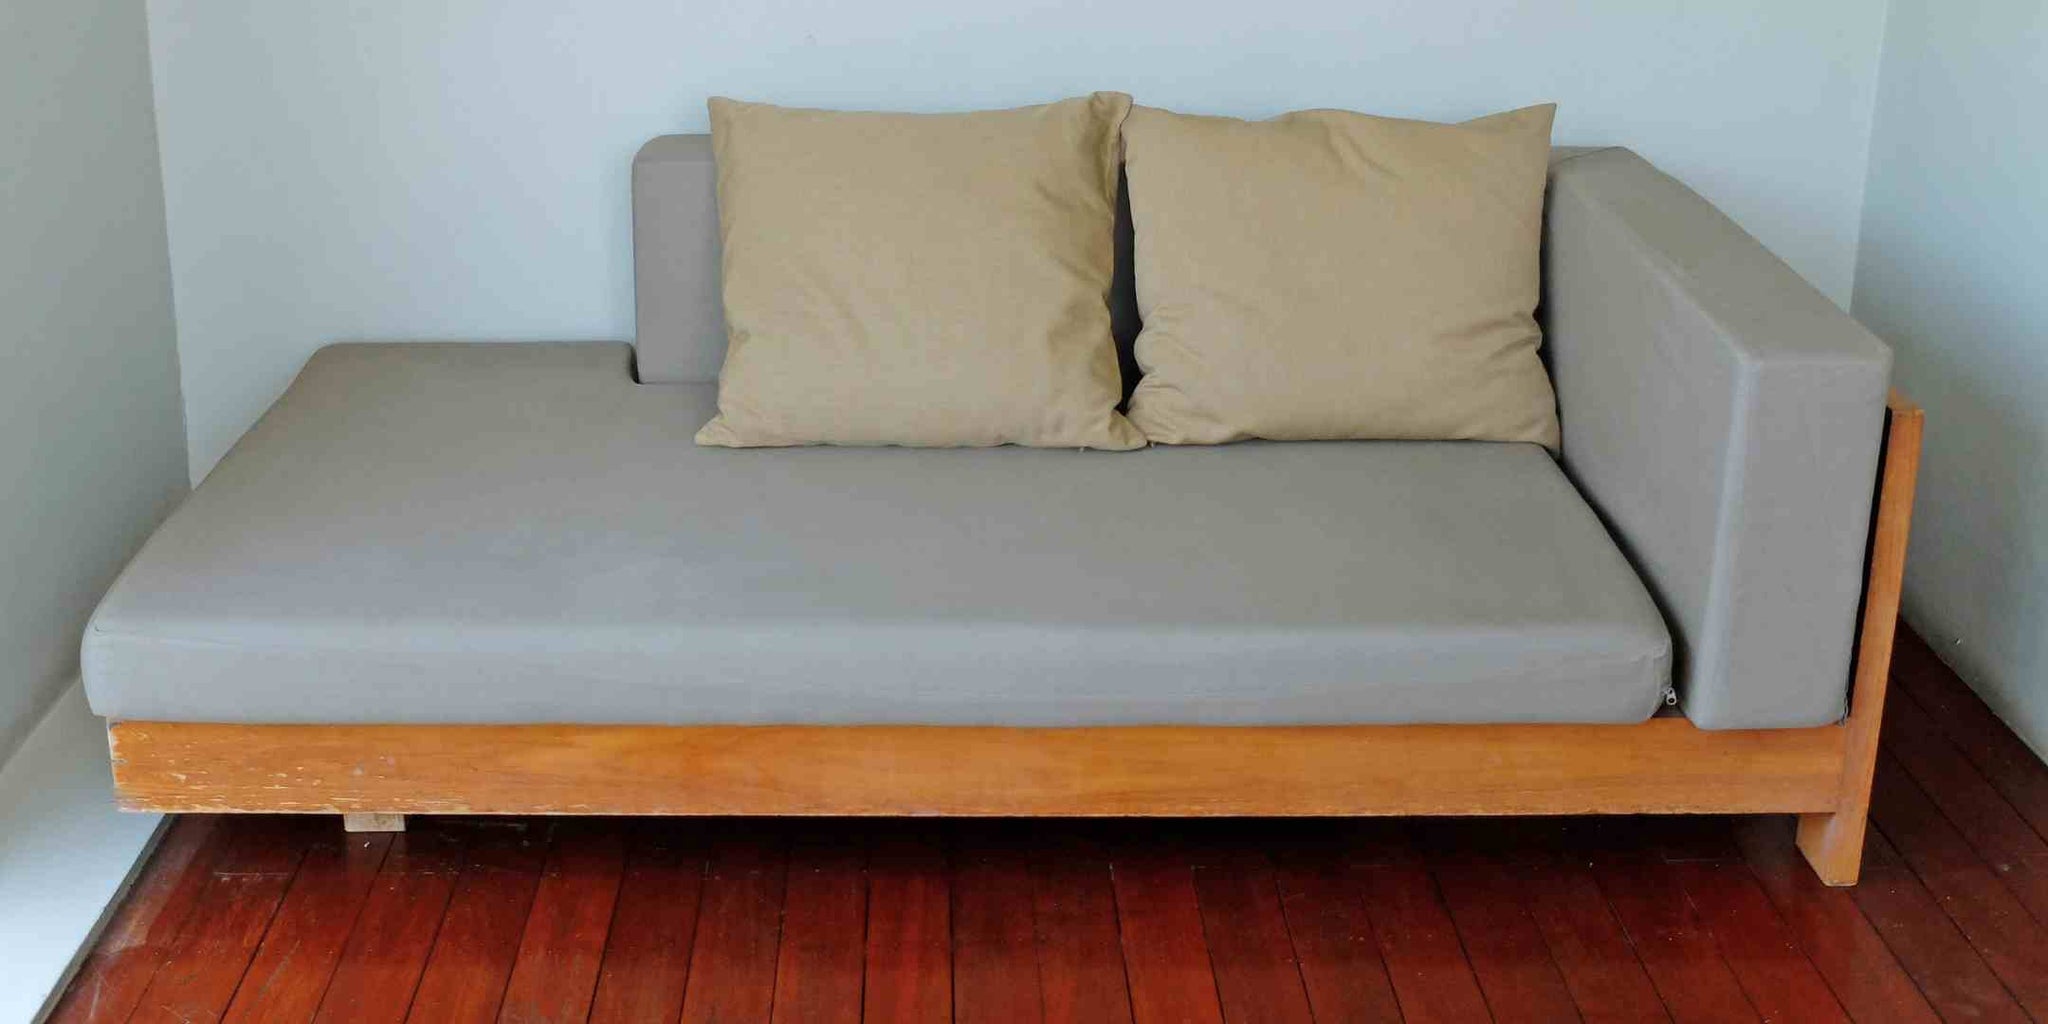 What is a Daybed?